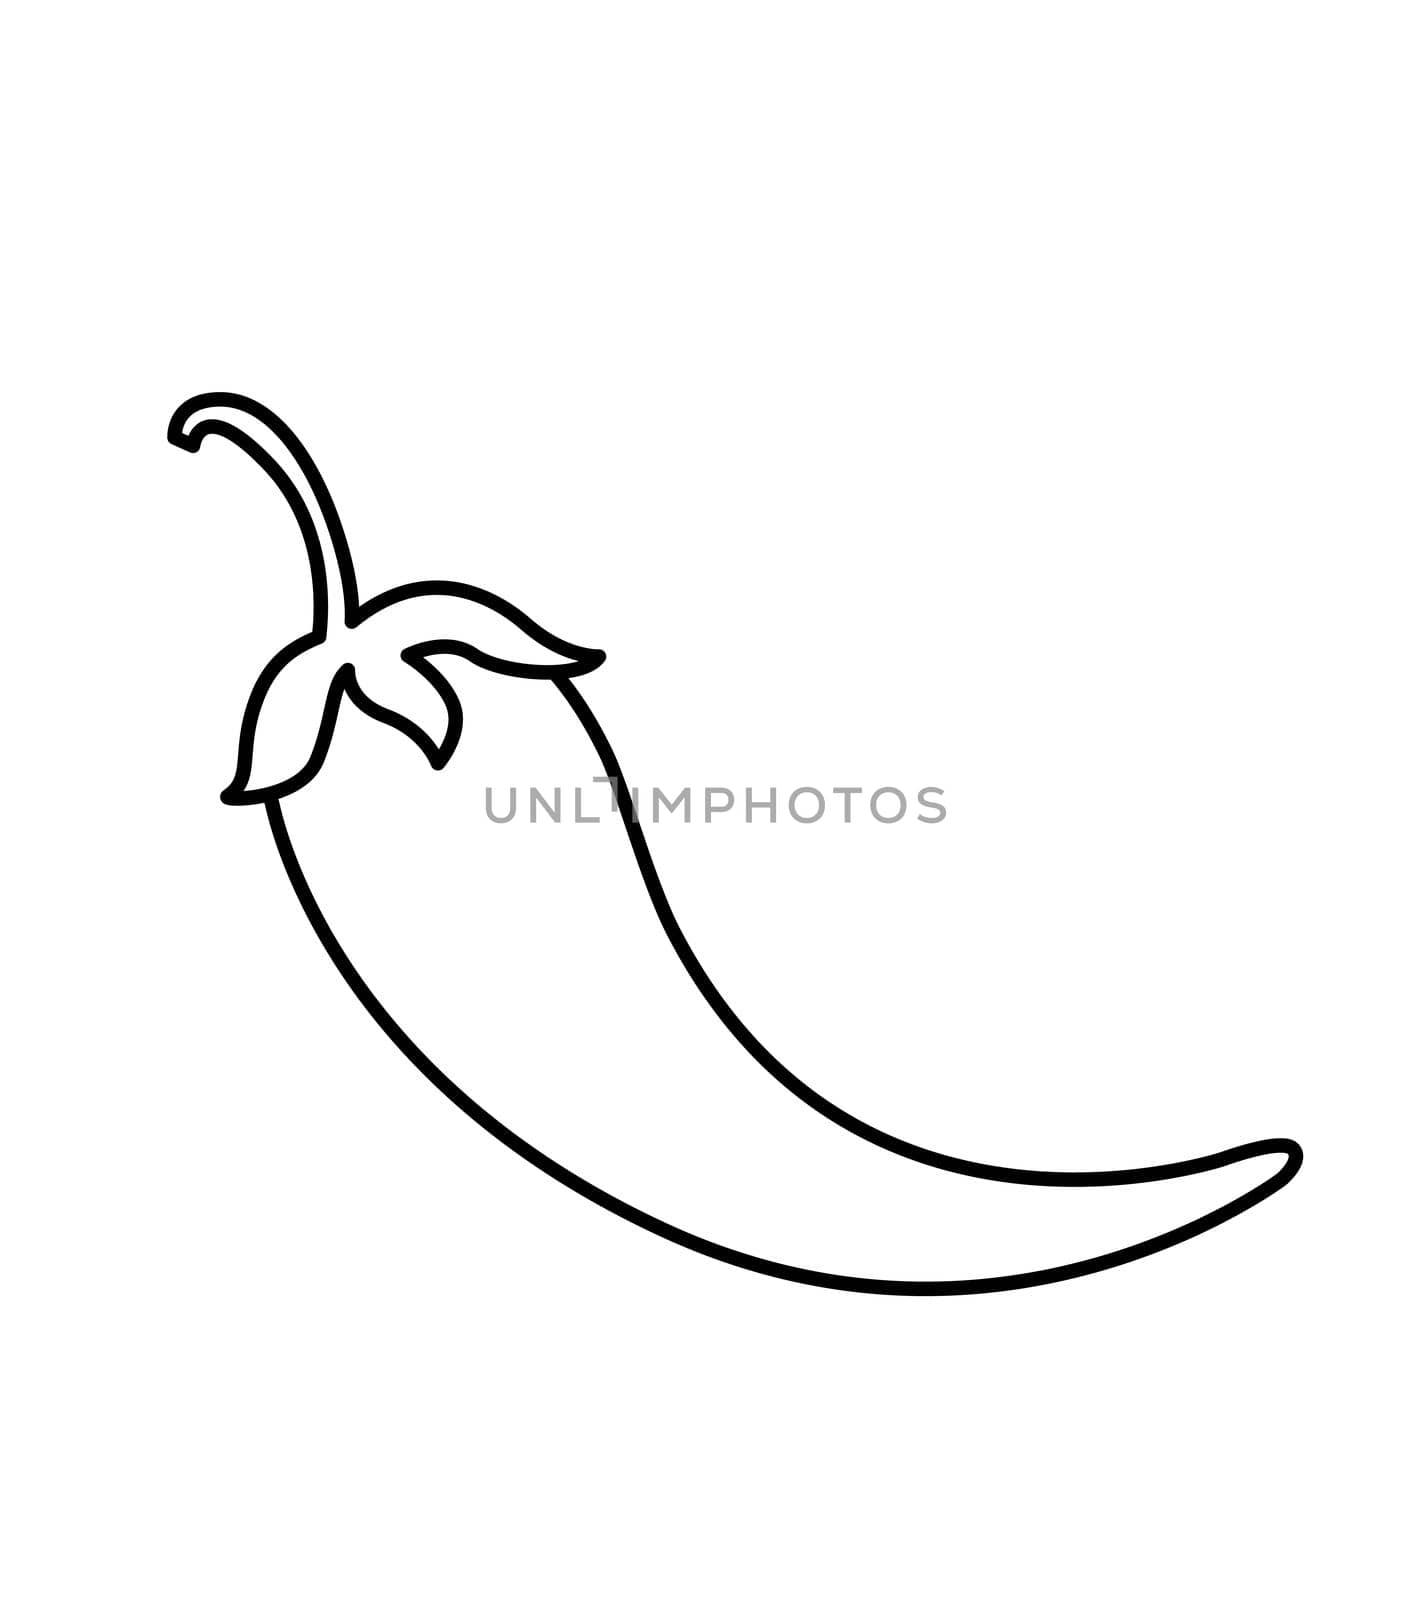 Chili pepper web line black icon vector isolated on white background flat